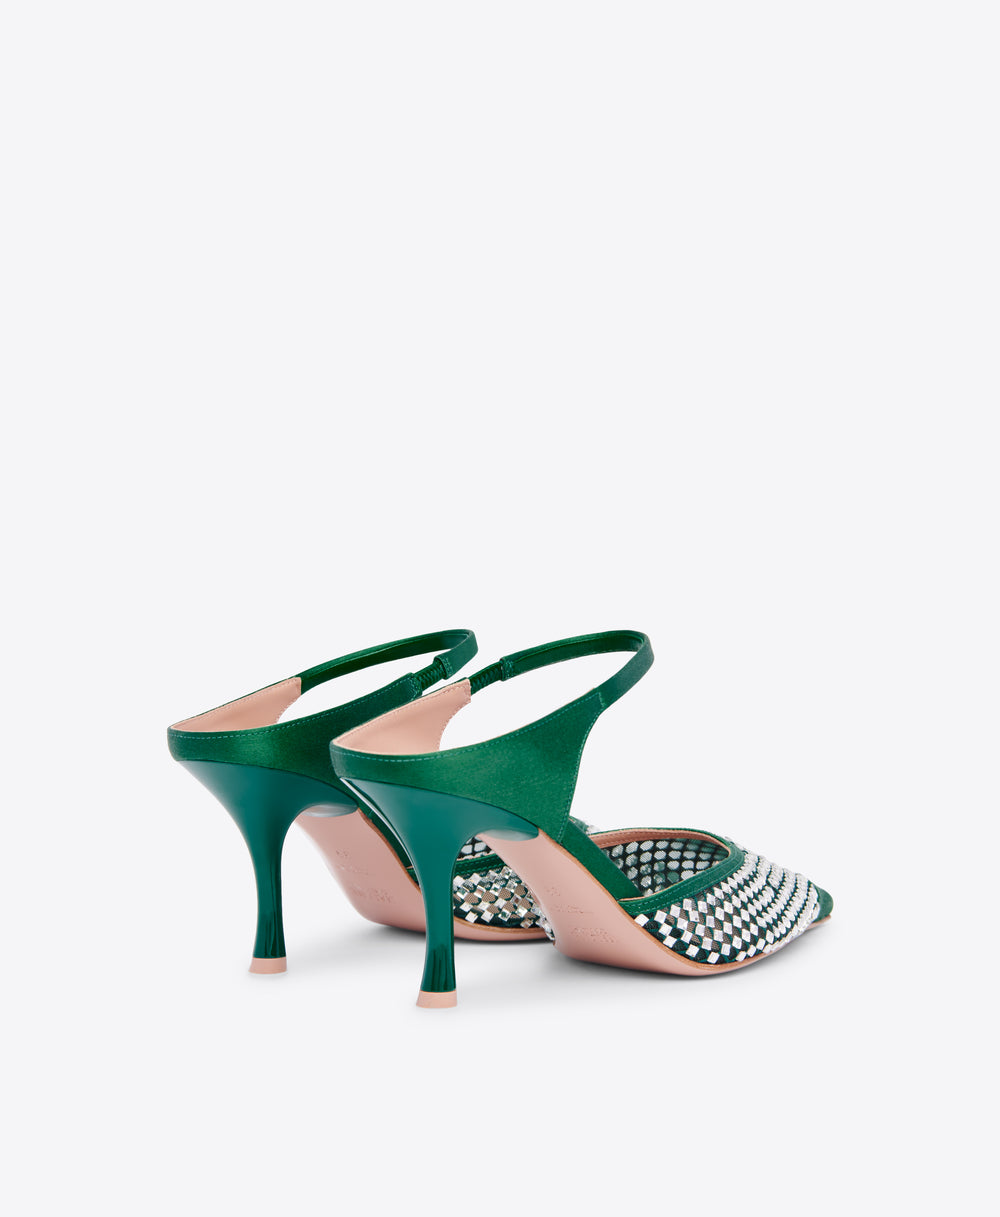 Vega 70 Crystal Mesh Forest Green Satin Mule Malone Souliers